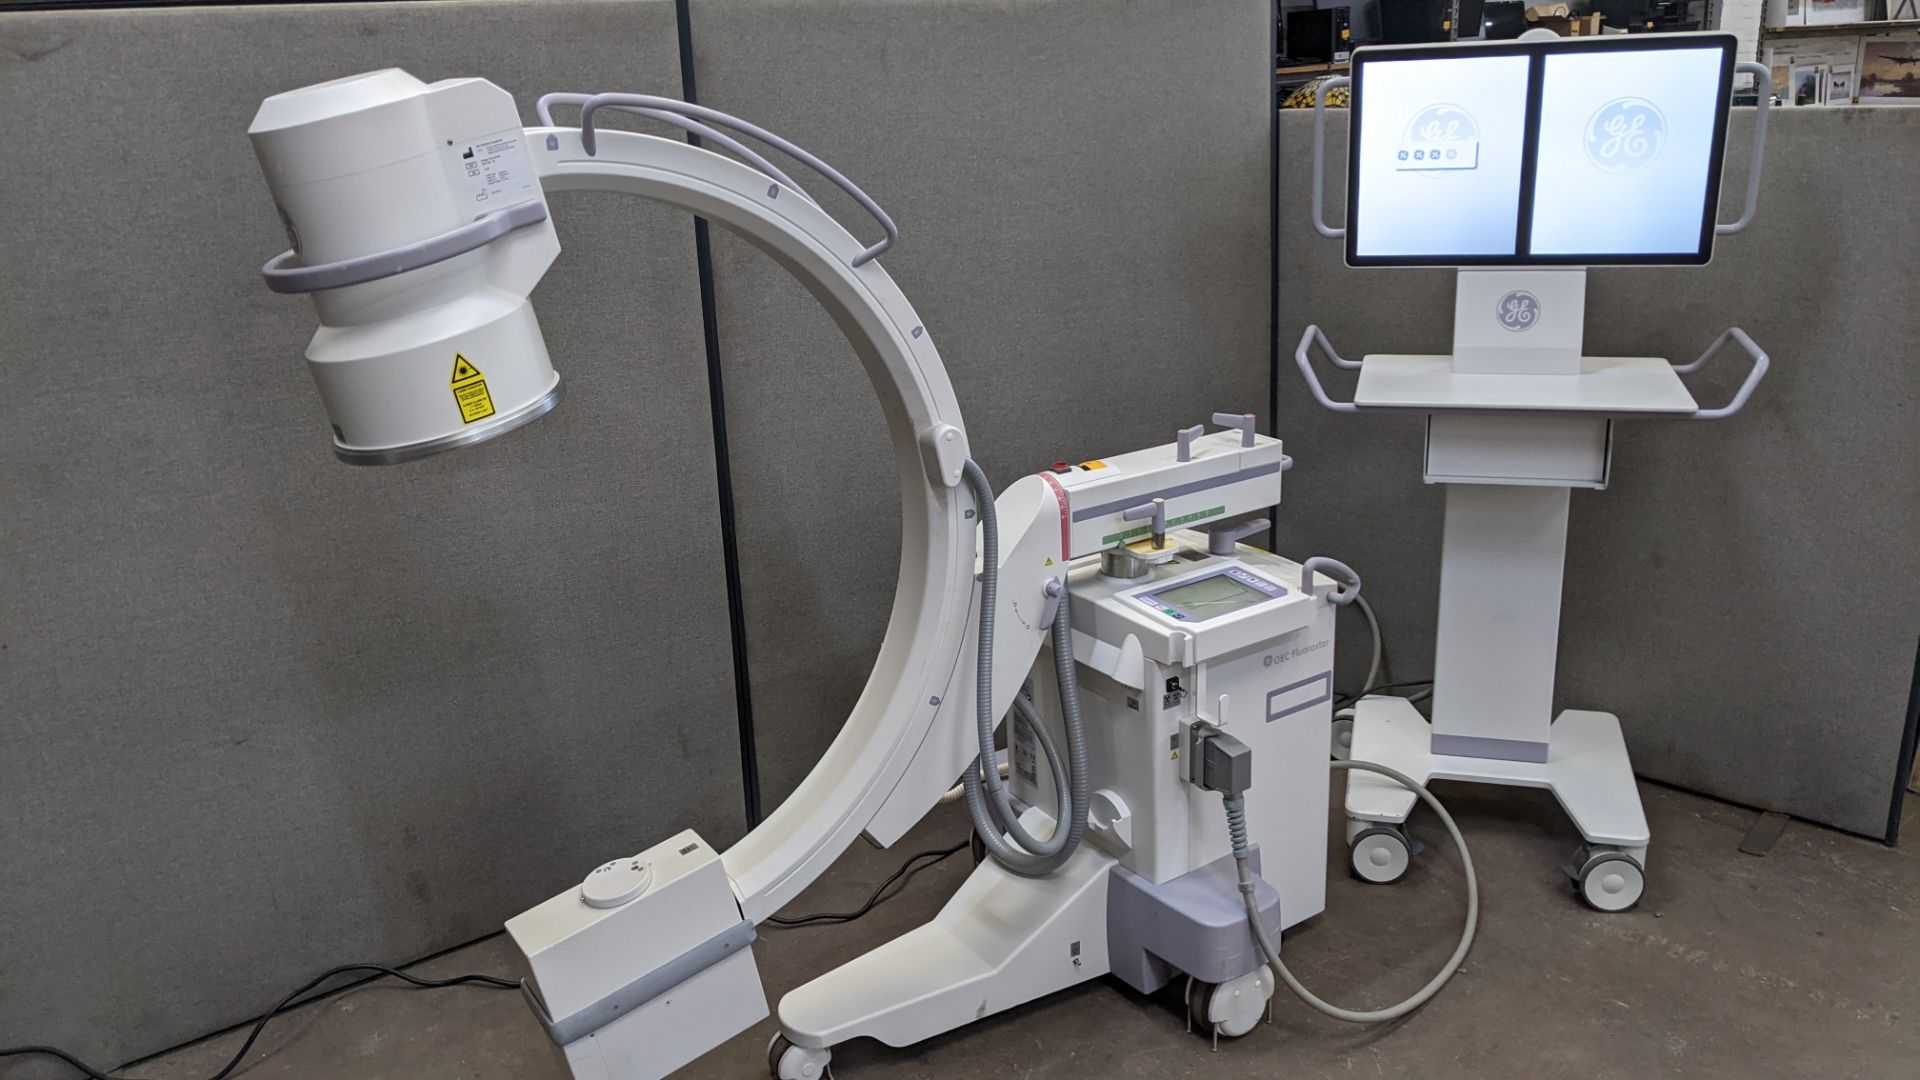 GE-OEC Fluorostar imaging system, purchased new in August 2017. EO4 Series. - Image 4 of 68